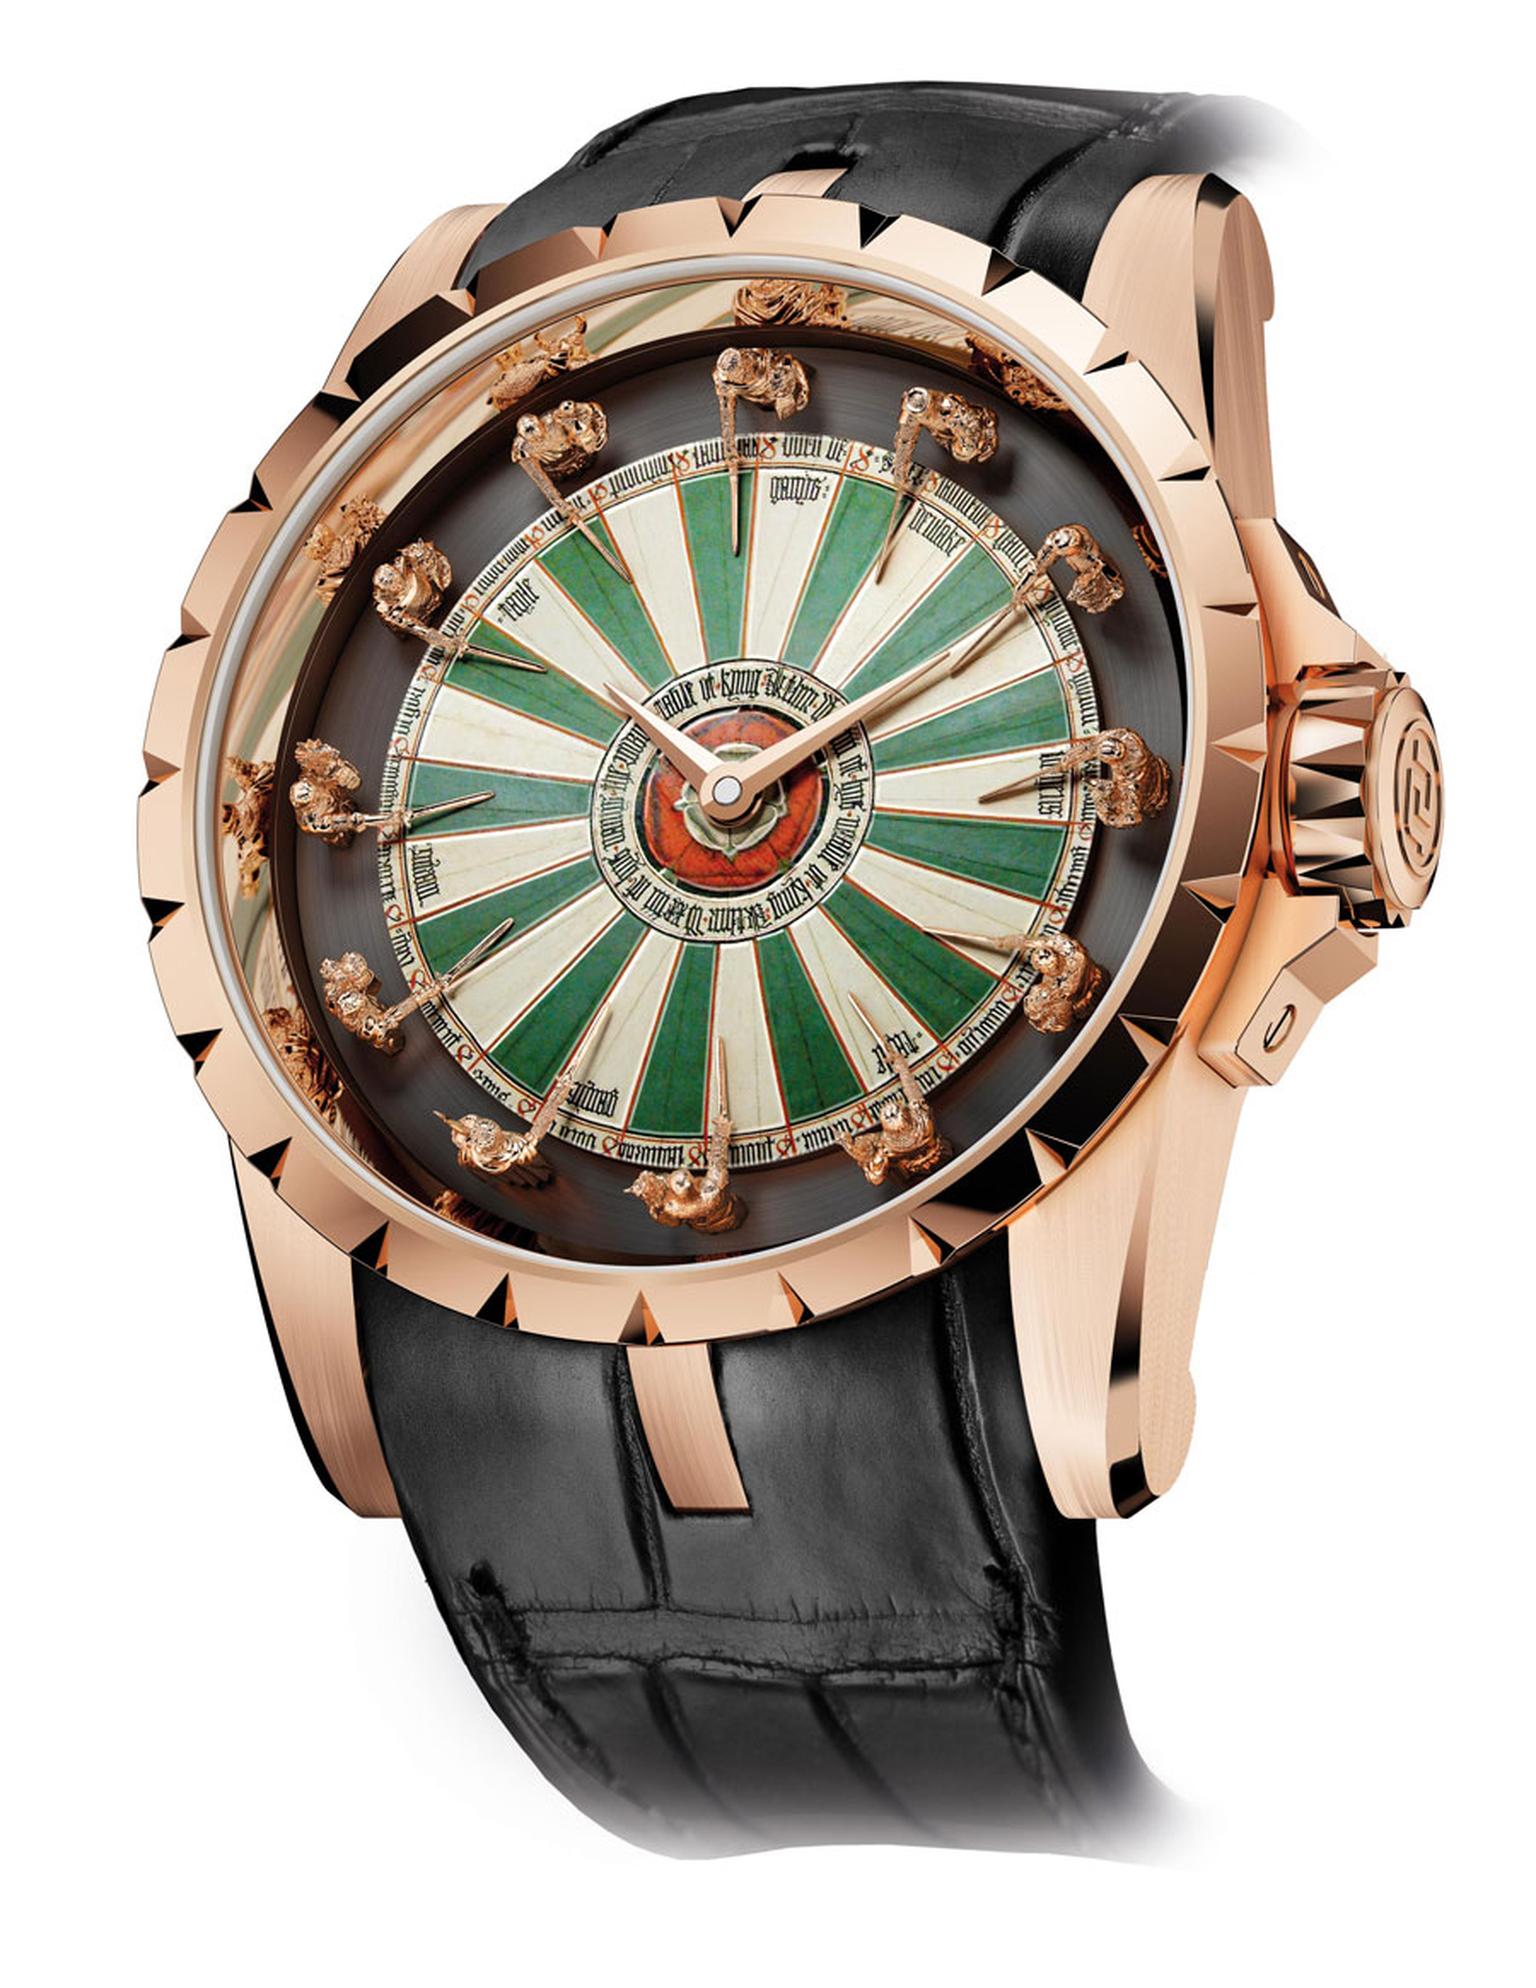 Roger-Dubuis-Excalibur-Table-Ronde.jpg